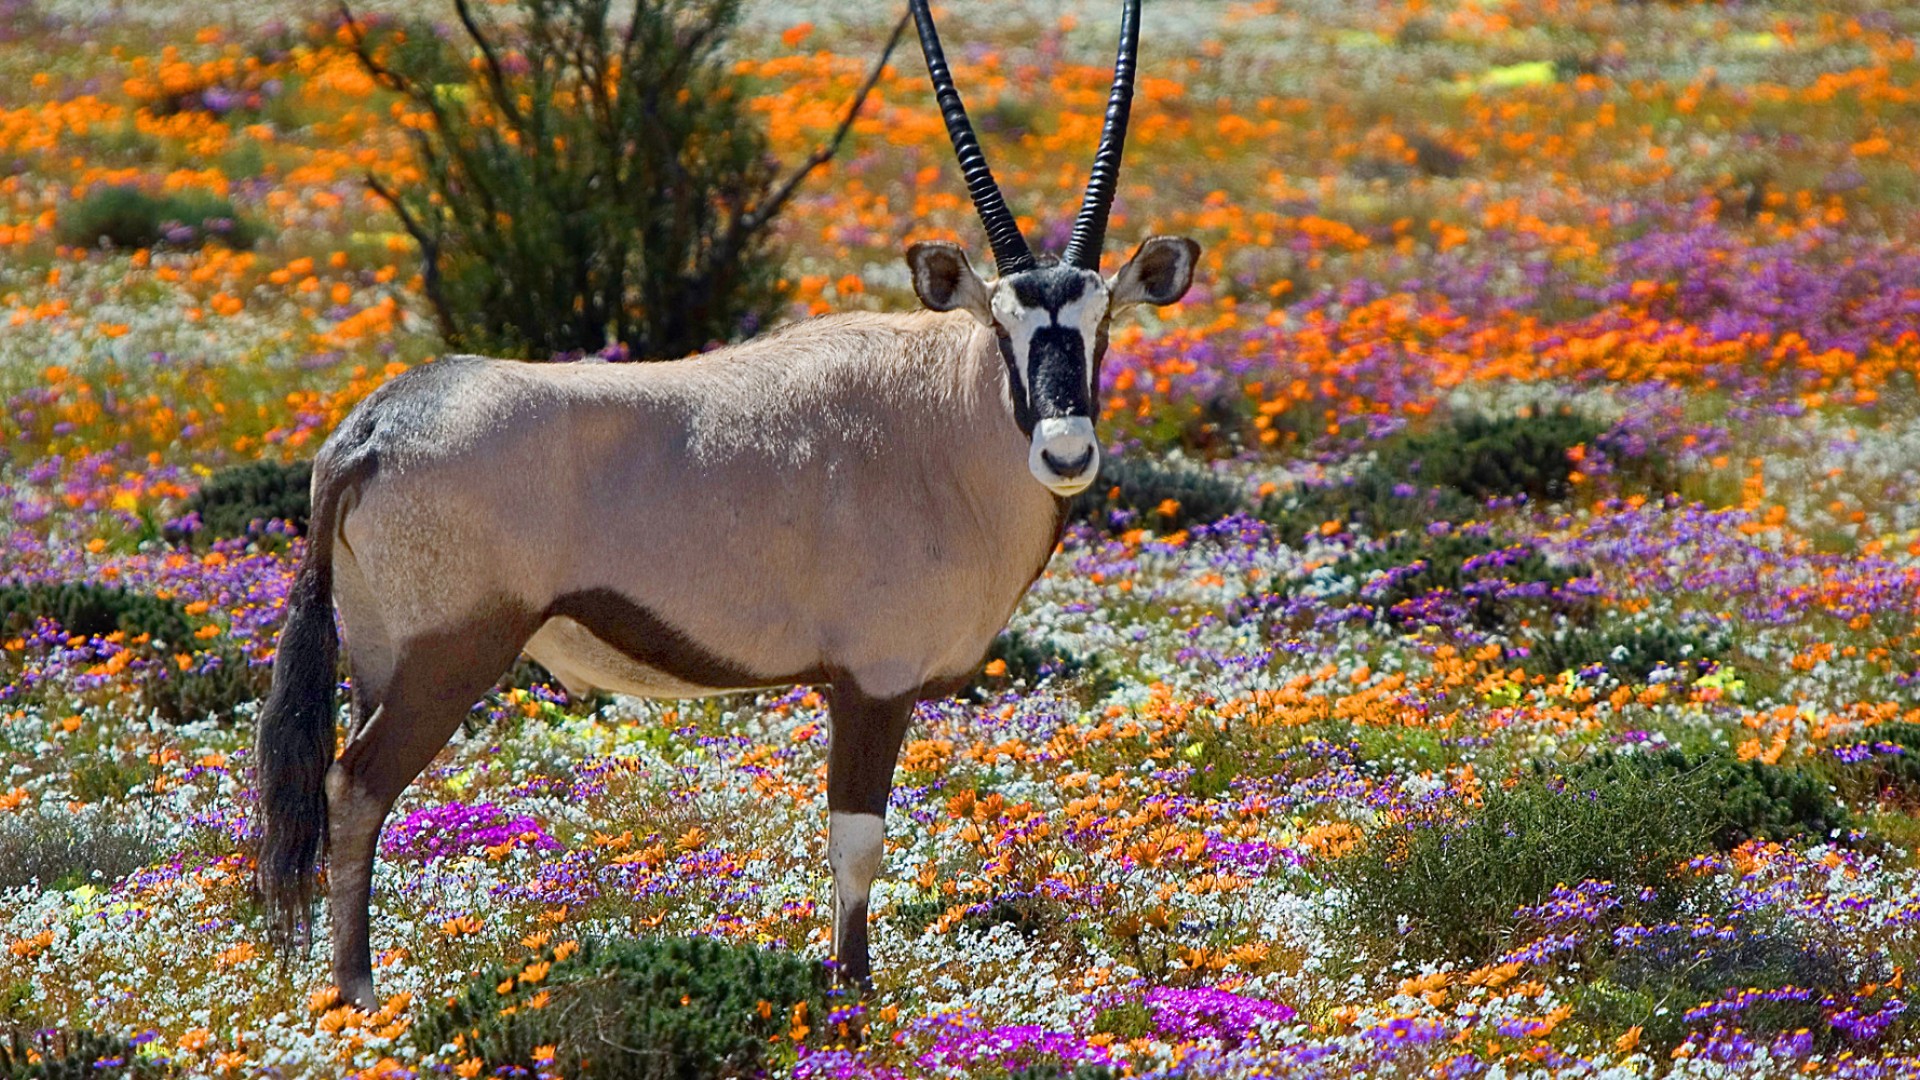 A single gazelle looking straight at the camera in front of a colorful field of flowers and foliage